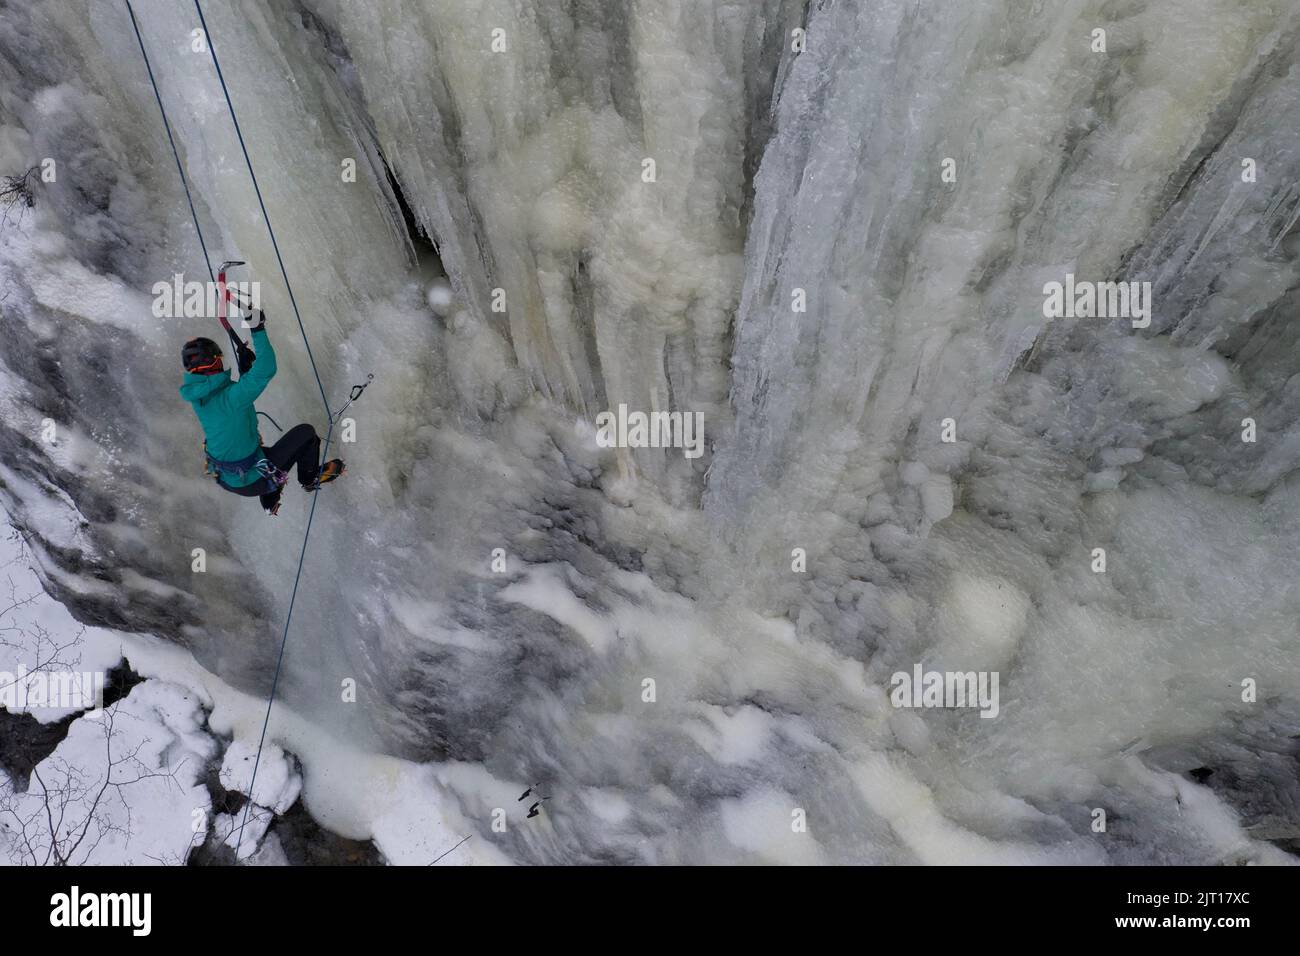 Unidentified personn ice climbing in a icefall in Ushuaia, Tierra del Fuego - Argentina Stock Photo